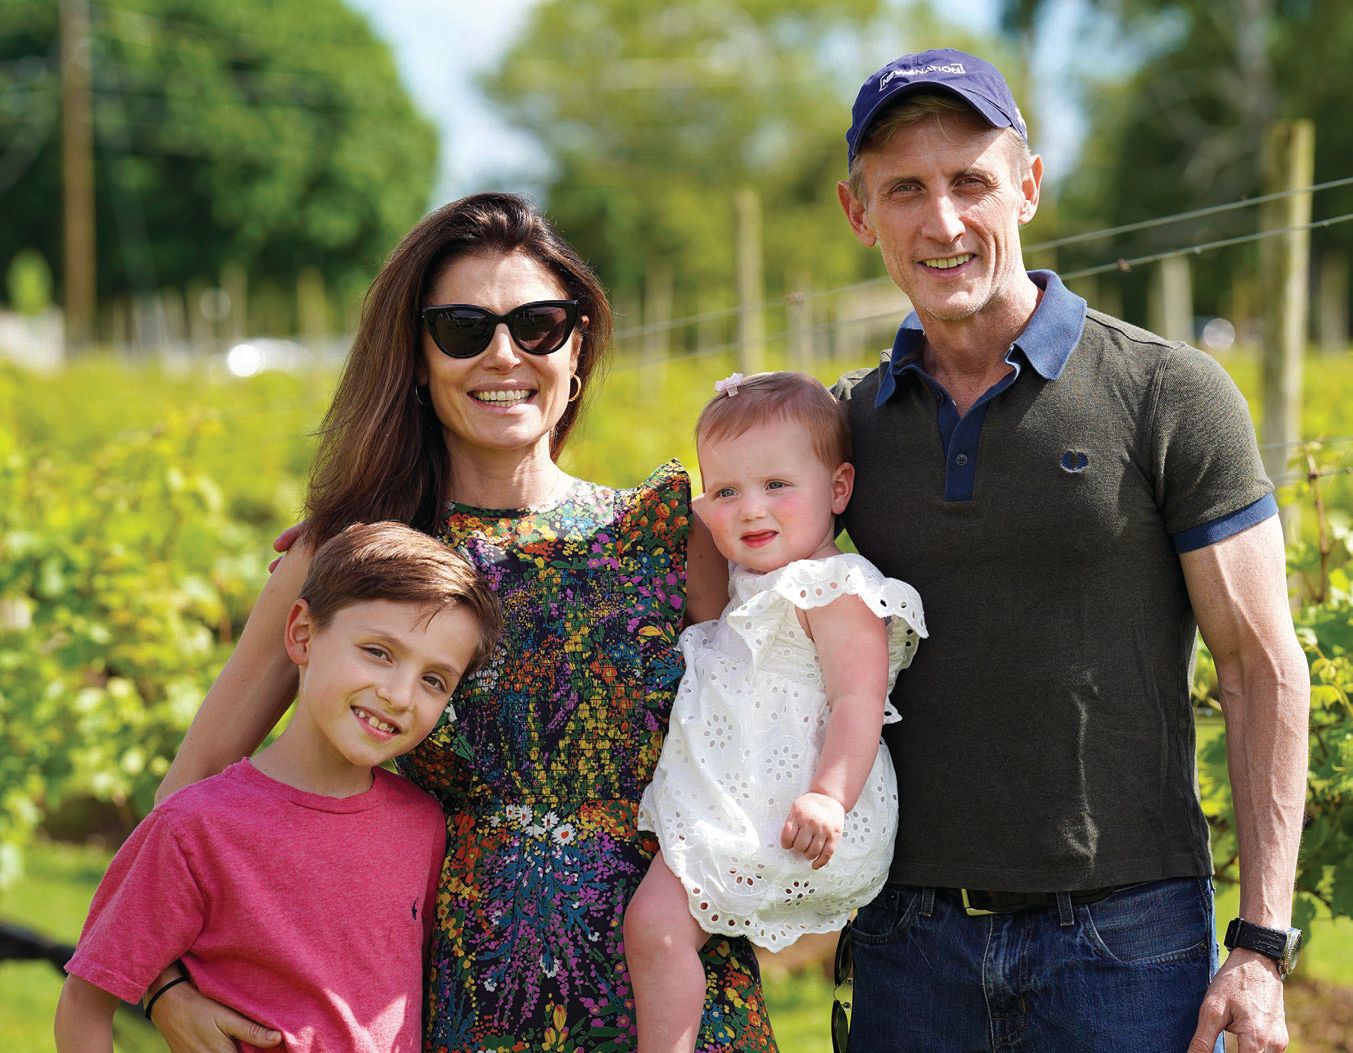 Ev&Em Vineyards owner Dan Abrams with his family PHOTO COURTESY OF BRAND